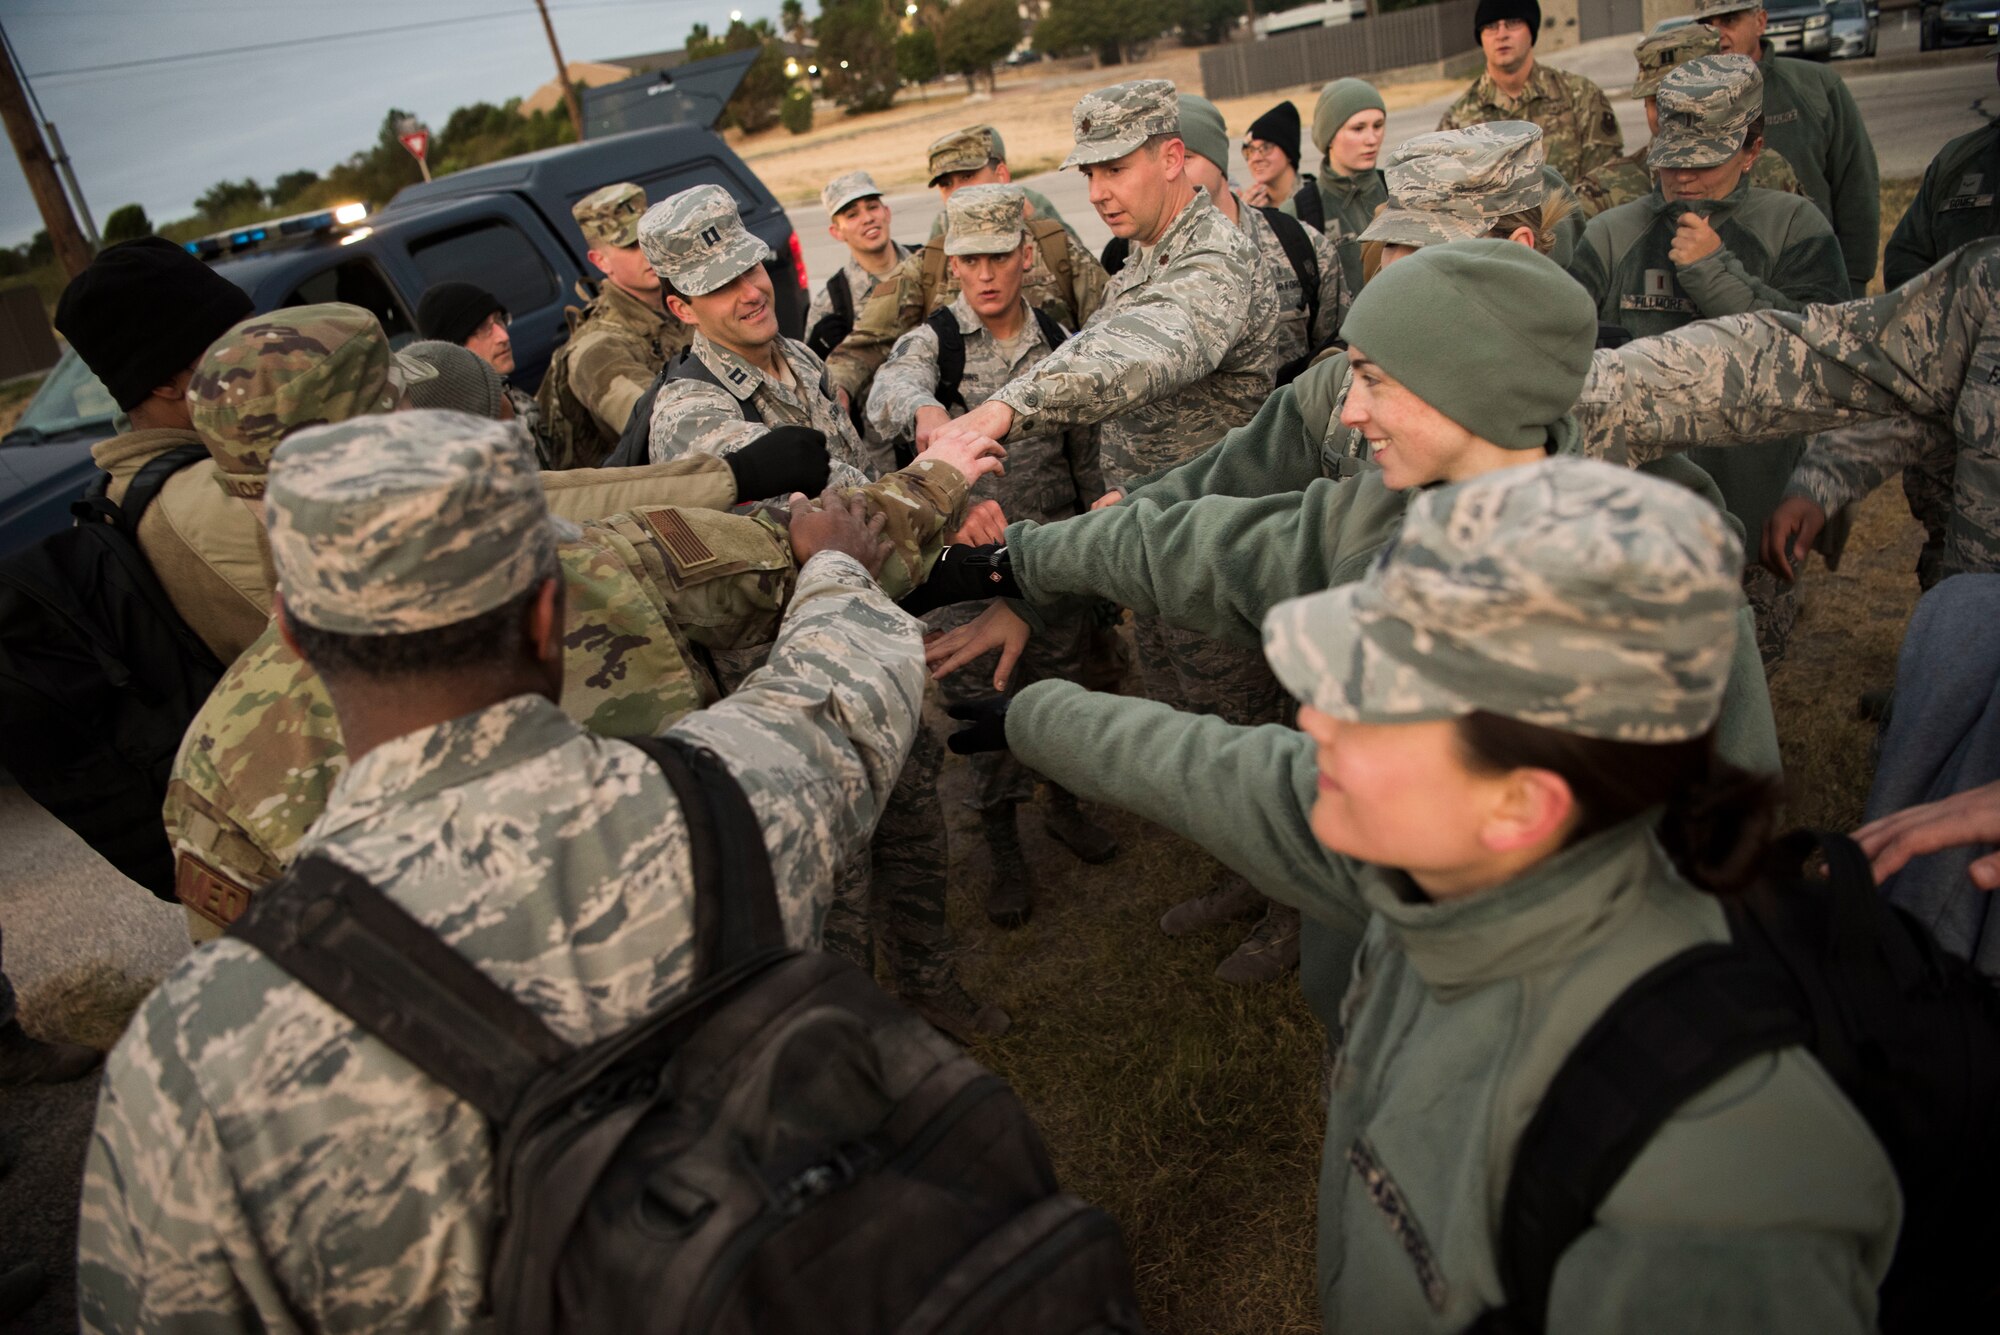 Airmen assigned to the 47th Operational Medical Readiness Squadron gather one last time to celebrate their hard work during a readiness exercise at Laughlin Air Force Base, Texas, Oct. 25, 2019. Communication, command and control were key takeaways from the readiness exercise, said MSgt. Jason Anderson, 47th OMRS NCO in charge of flight medicine. (U.S. Air Force photo by Senior Airman Marco A. Gomez)